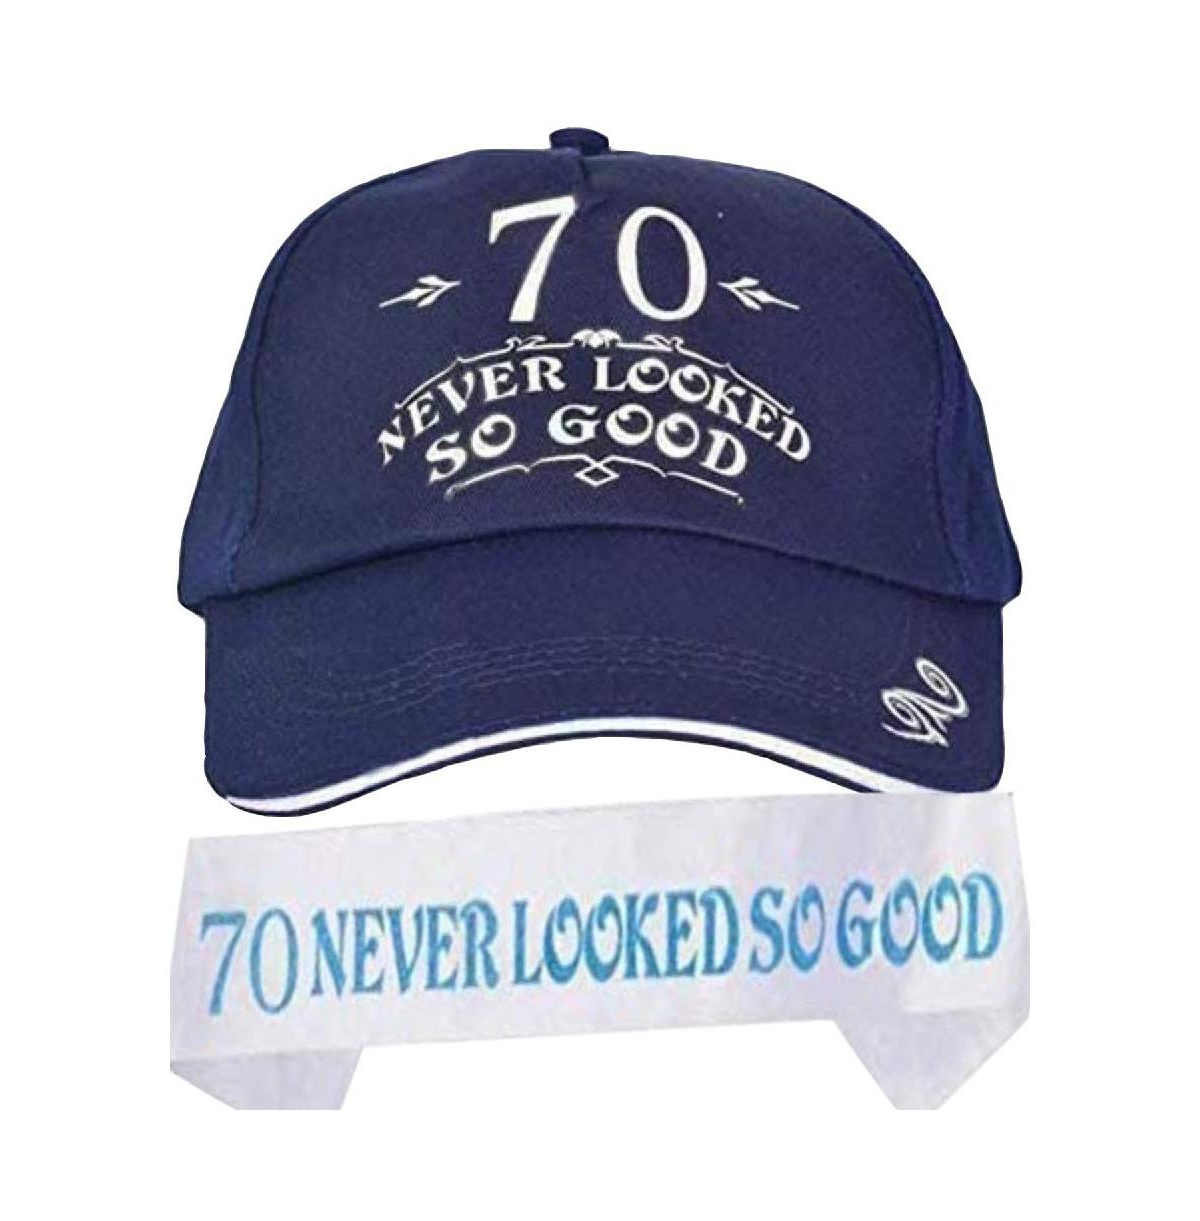 70th Birthday Gifts for Men, 70th Birthday Hat and Sash Men, 70 Never Looked So Good Baseball Cap and Sash - Blue